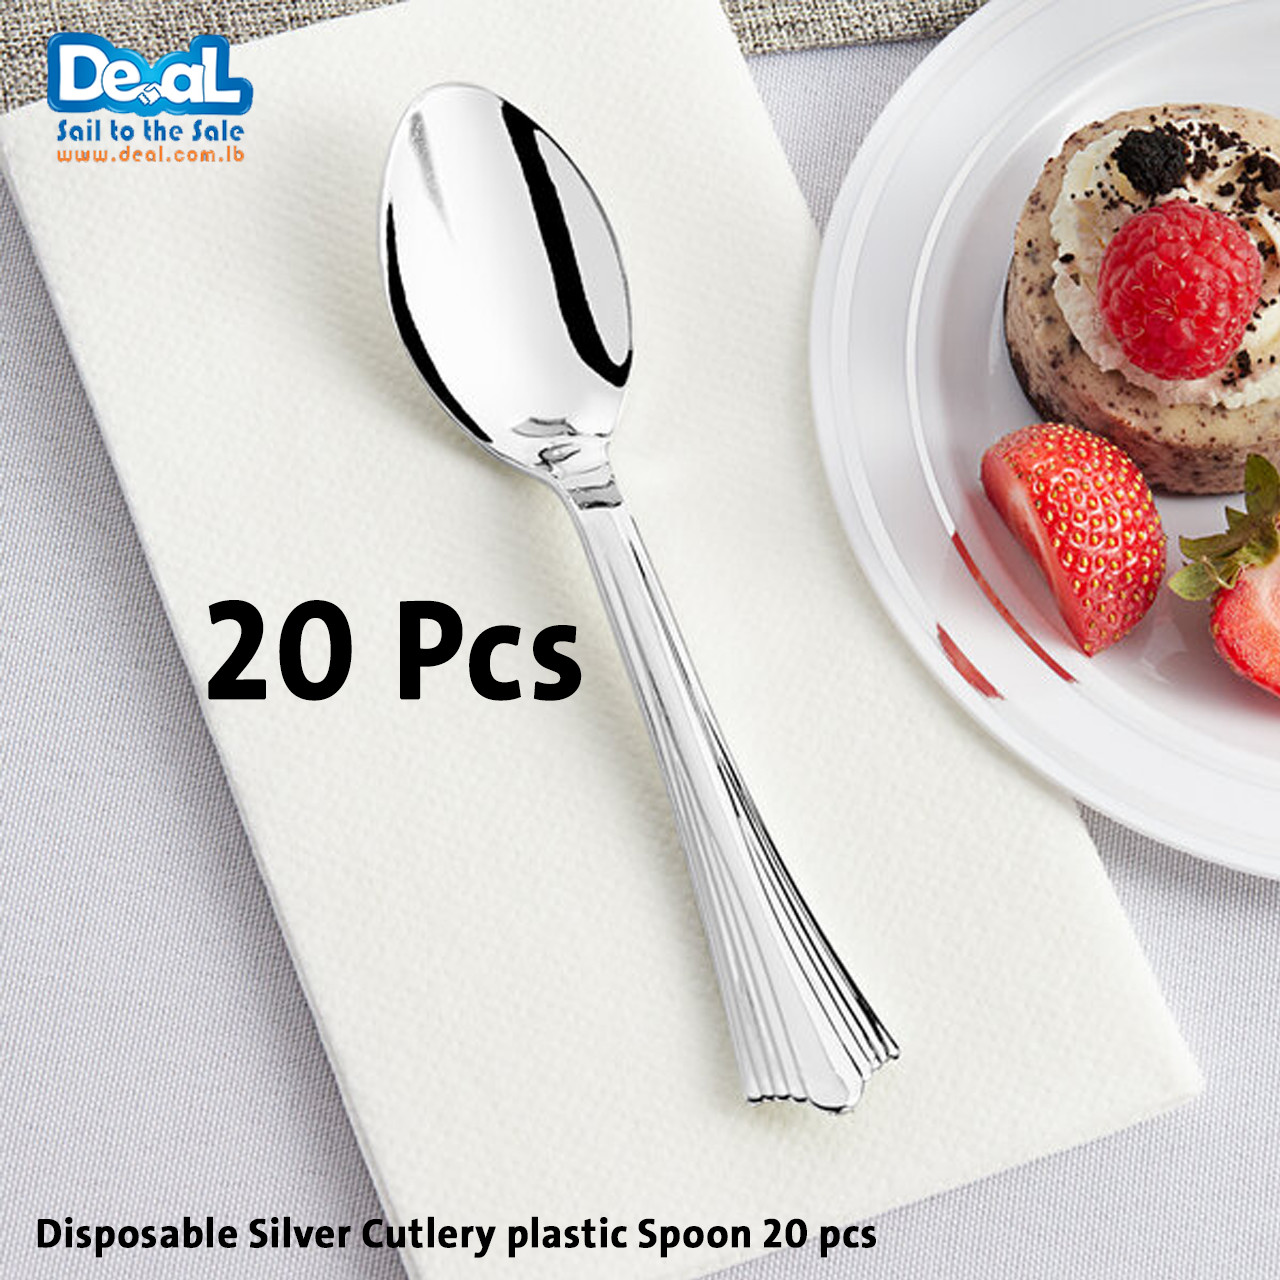 Disposable+Silver+Cutlery+plastic+Spoon+20+pcs